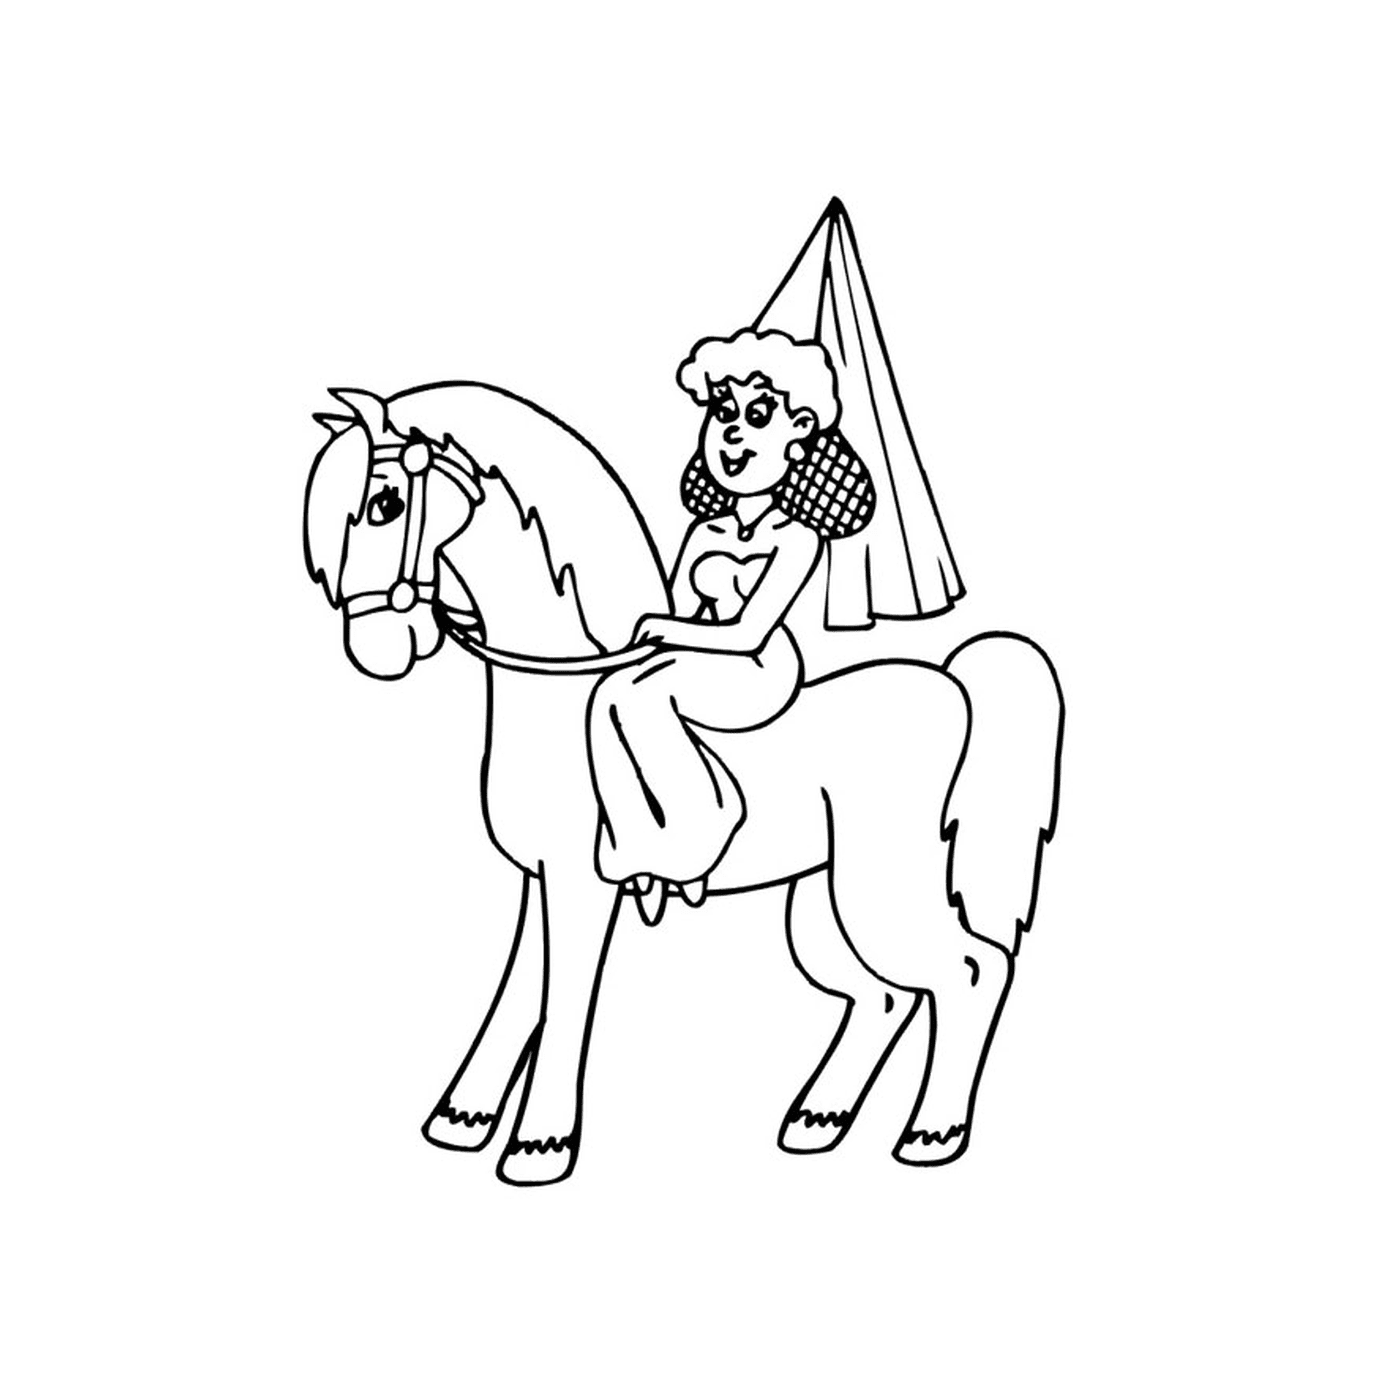  Person sitting on a princess horse 